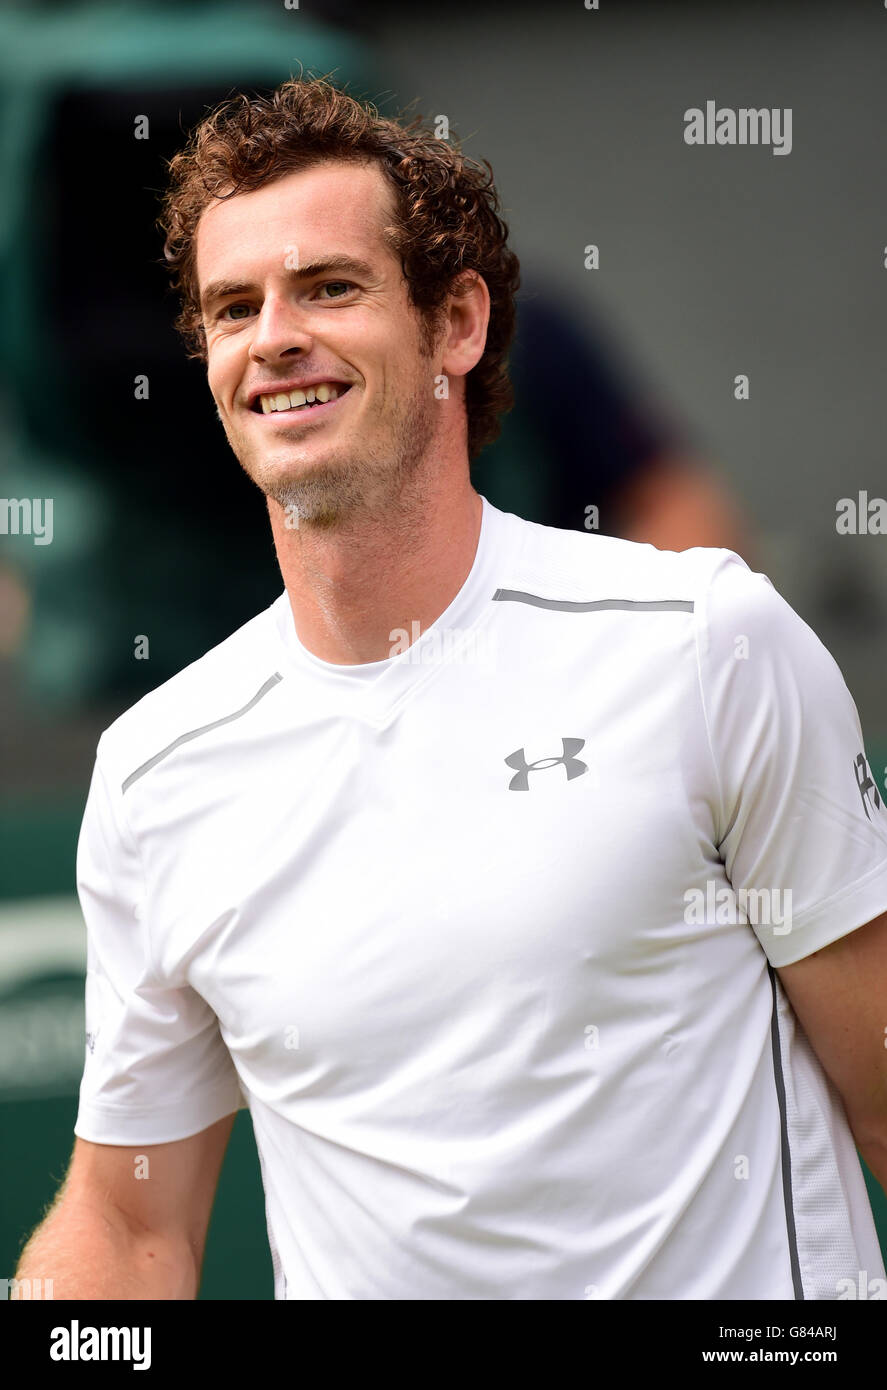 Andy Murray in action Vasek Pospisil during day Nine of the Wimbledon Championships at the All England Lawn Tennis and Croquet Club, Wimbledon. Stock Photo